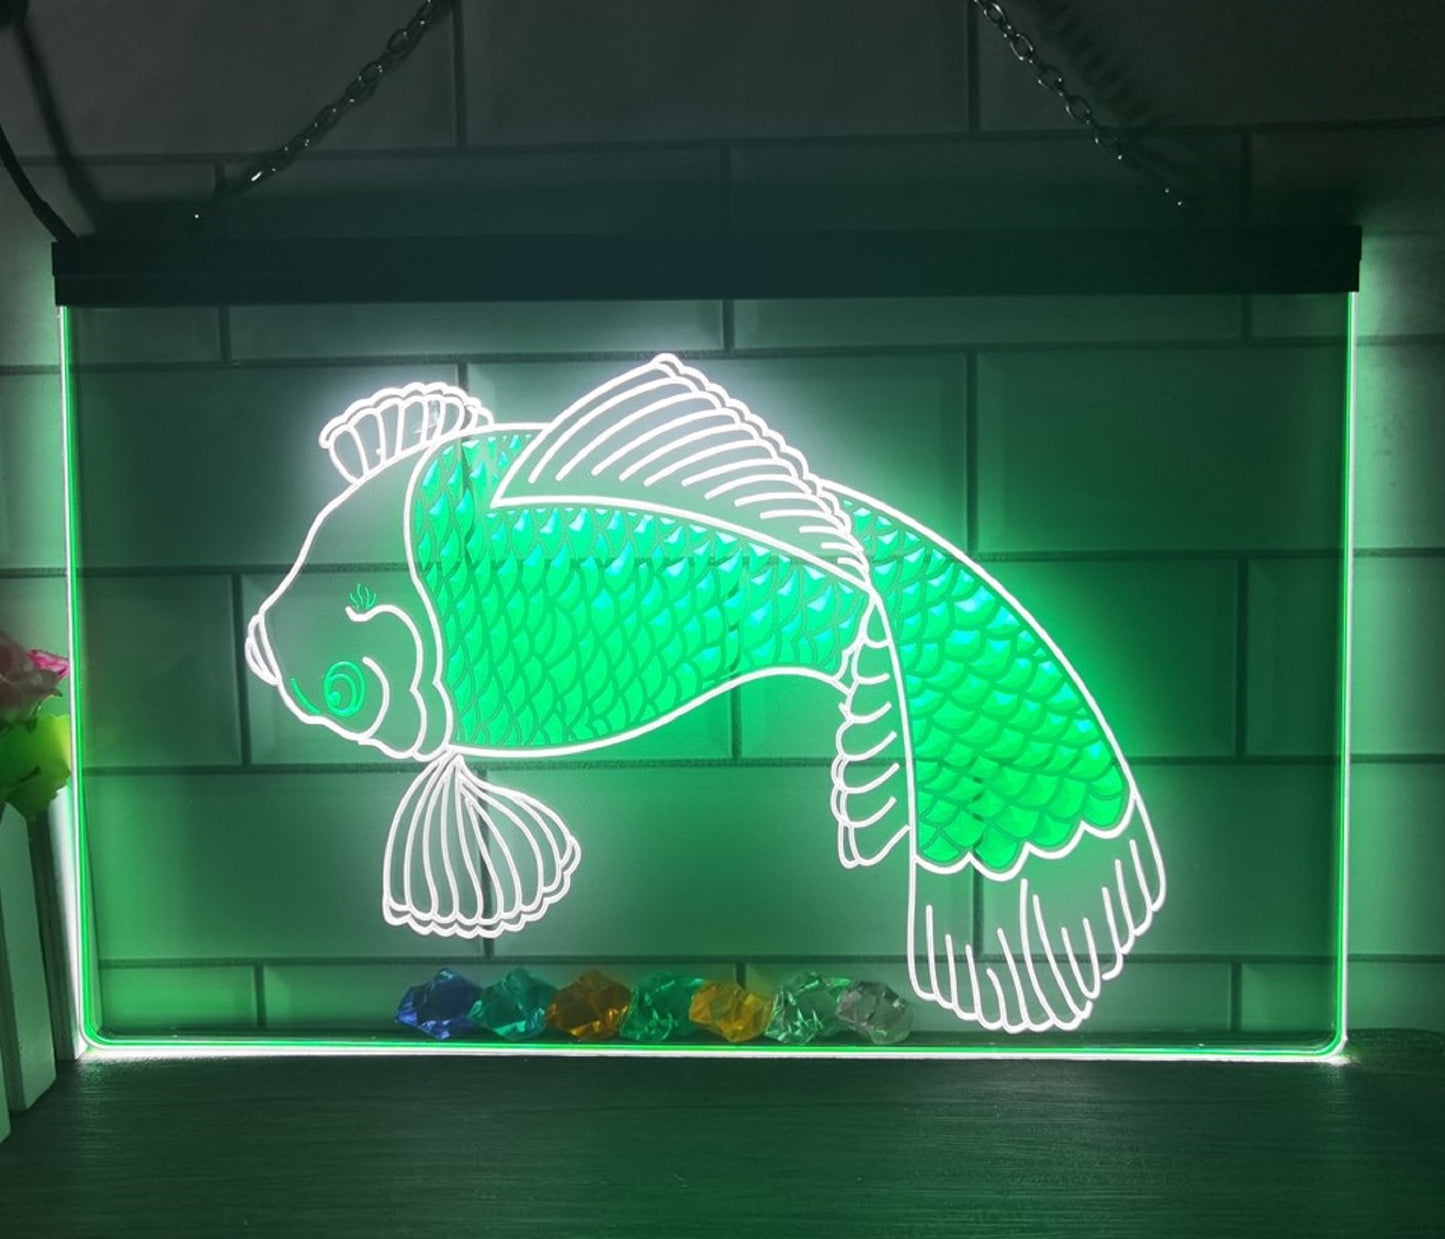 Neon Sign Dual Color Large Fish Sea Food Restaurant Decor Wall Table Top Decor